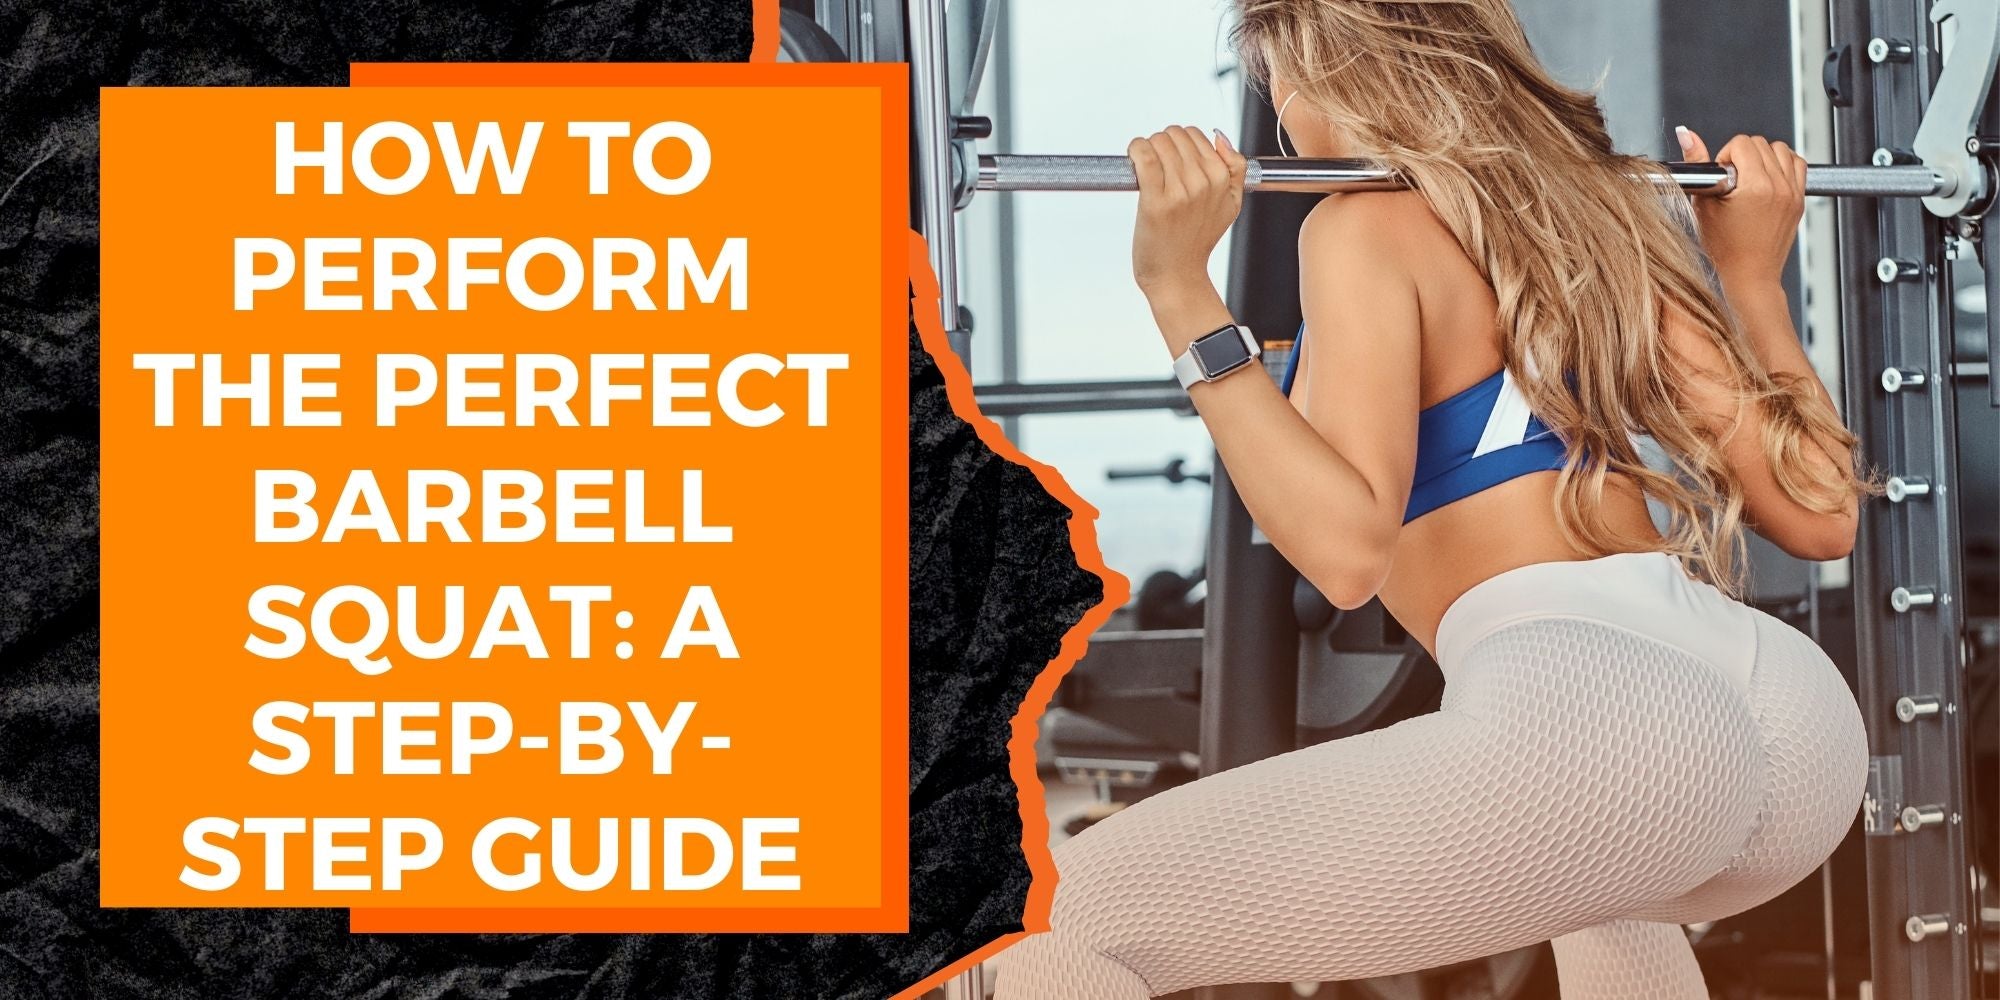 How to Perform the Perfect Barbell Squat: A Step-by-Step Guide